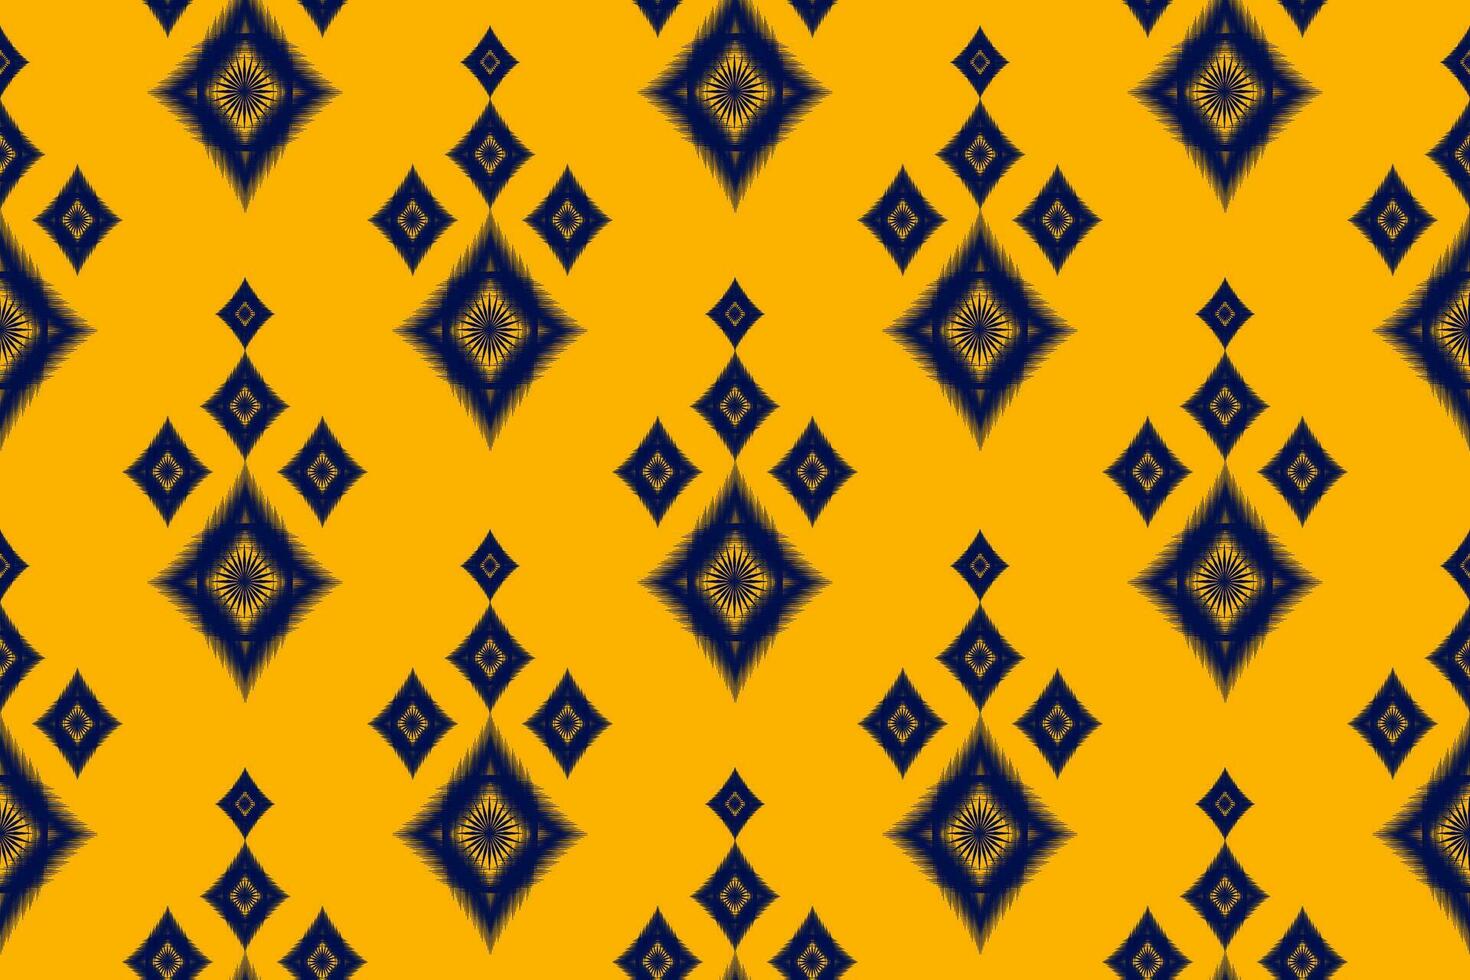 Ikat geometric folklore ornament. Tribal ethnic vector texture. Seamless striped pattern in Aztec style. Figure tribal embroidery. Indian, Scandinavian, Gypsy, Mexican, folk pattern.